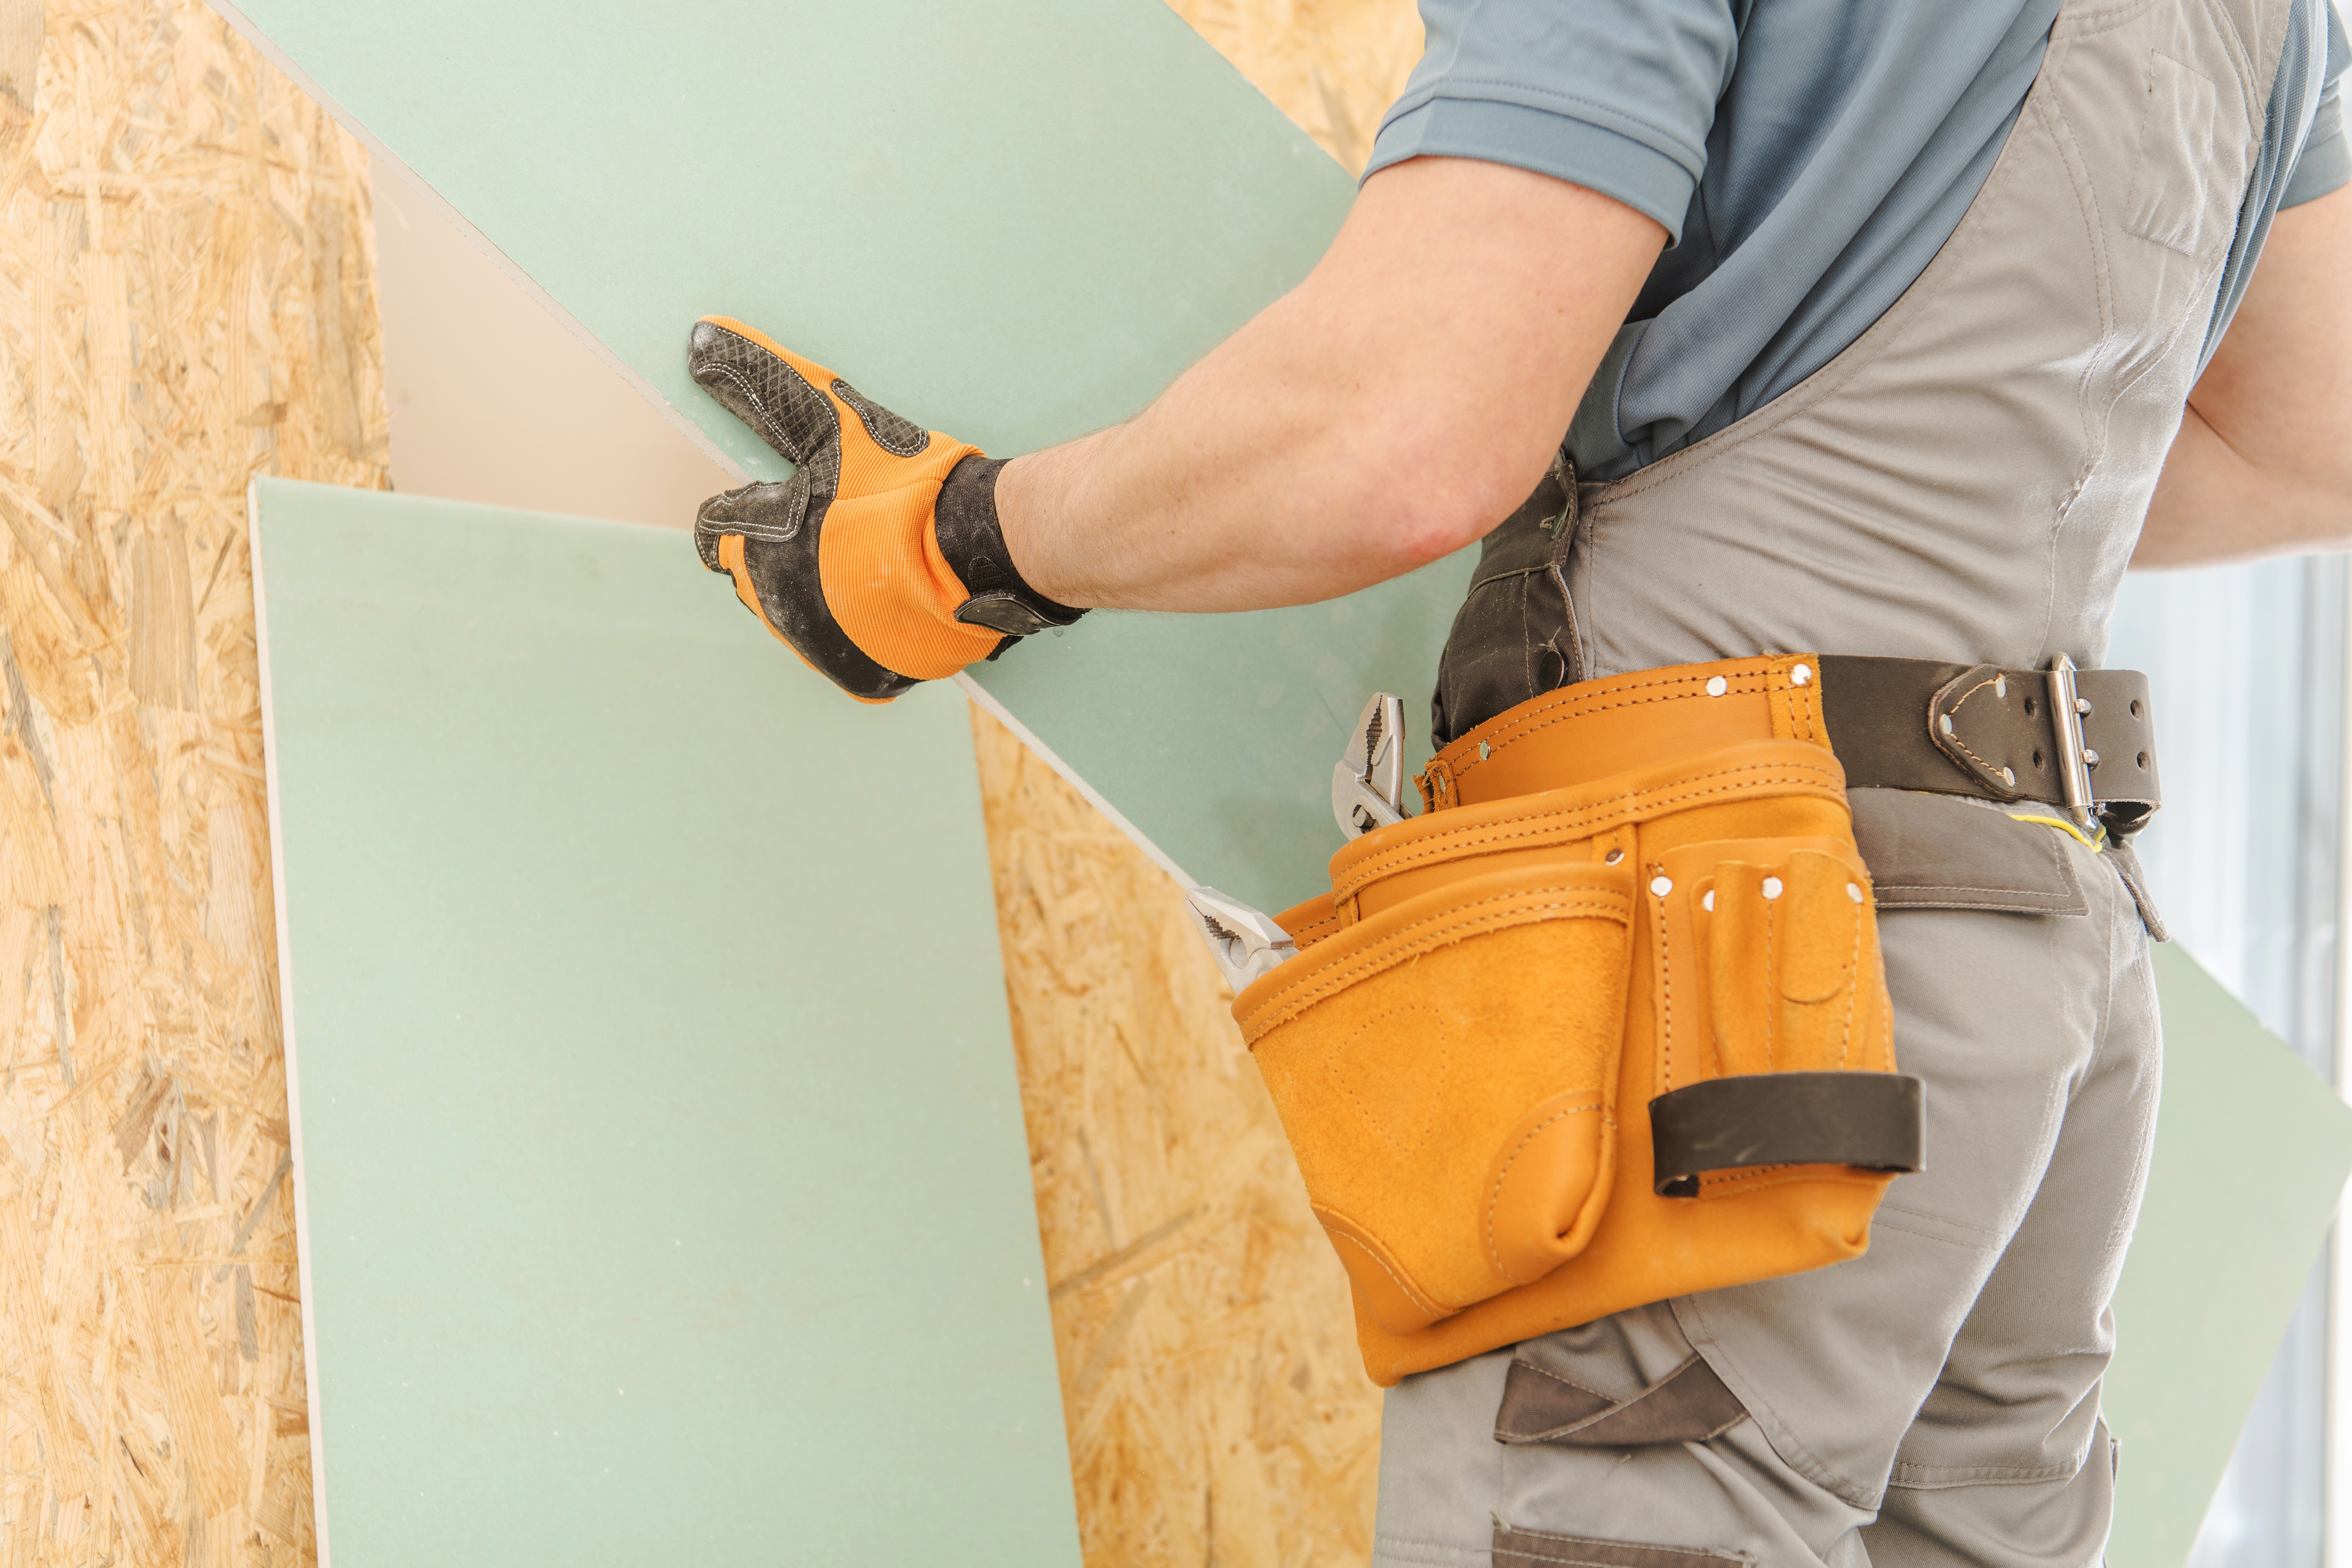 Home Repair and Remodeling Services in Lake Travis Texas